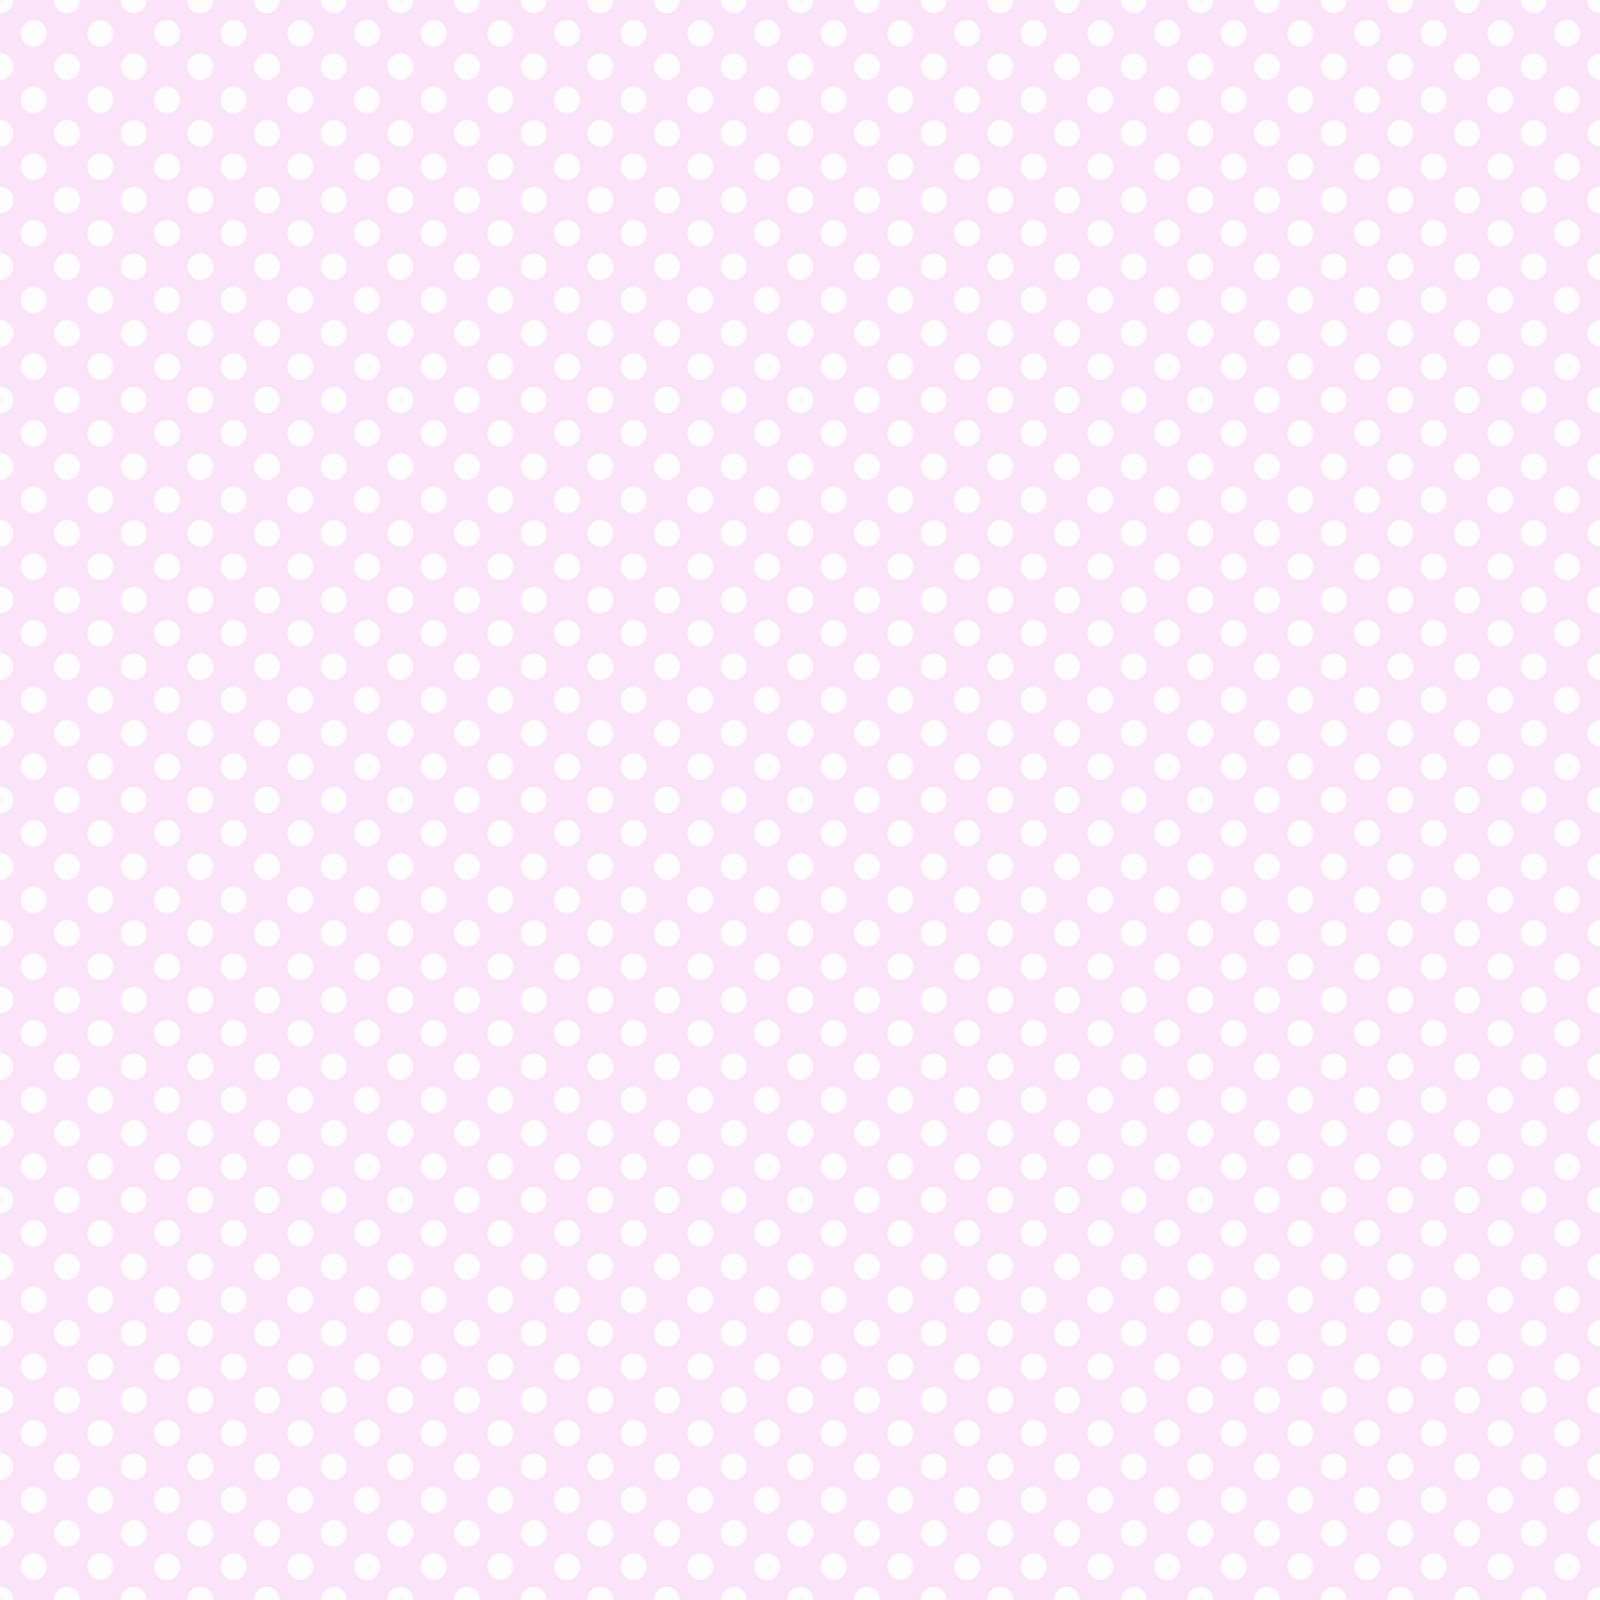  little polka dots i like polka dots i have more to share with you